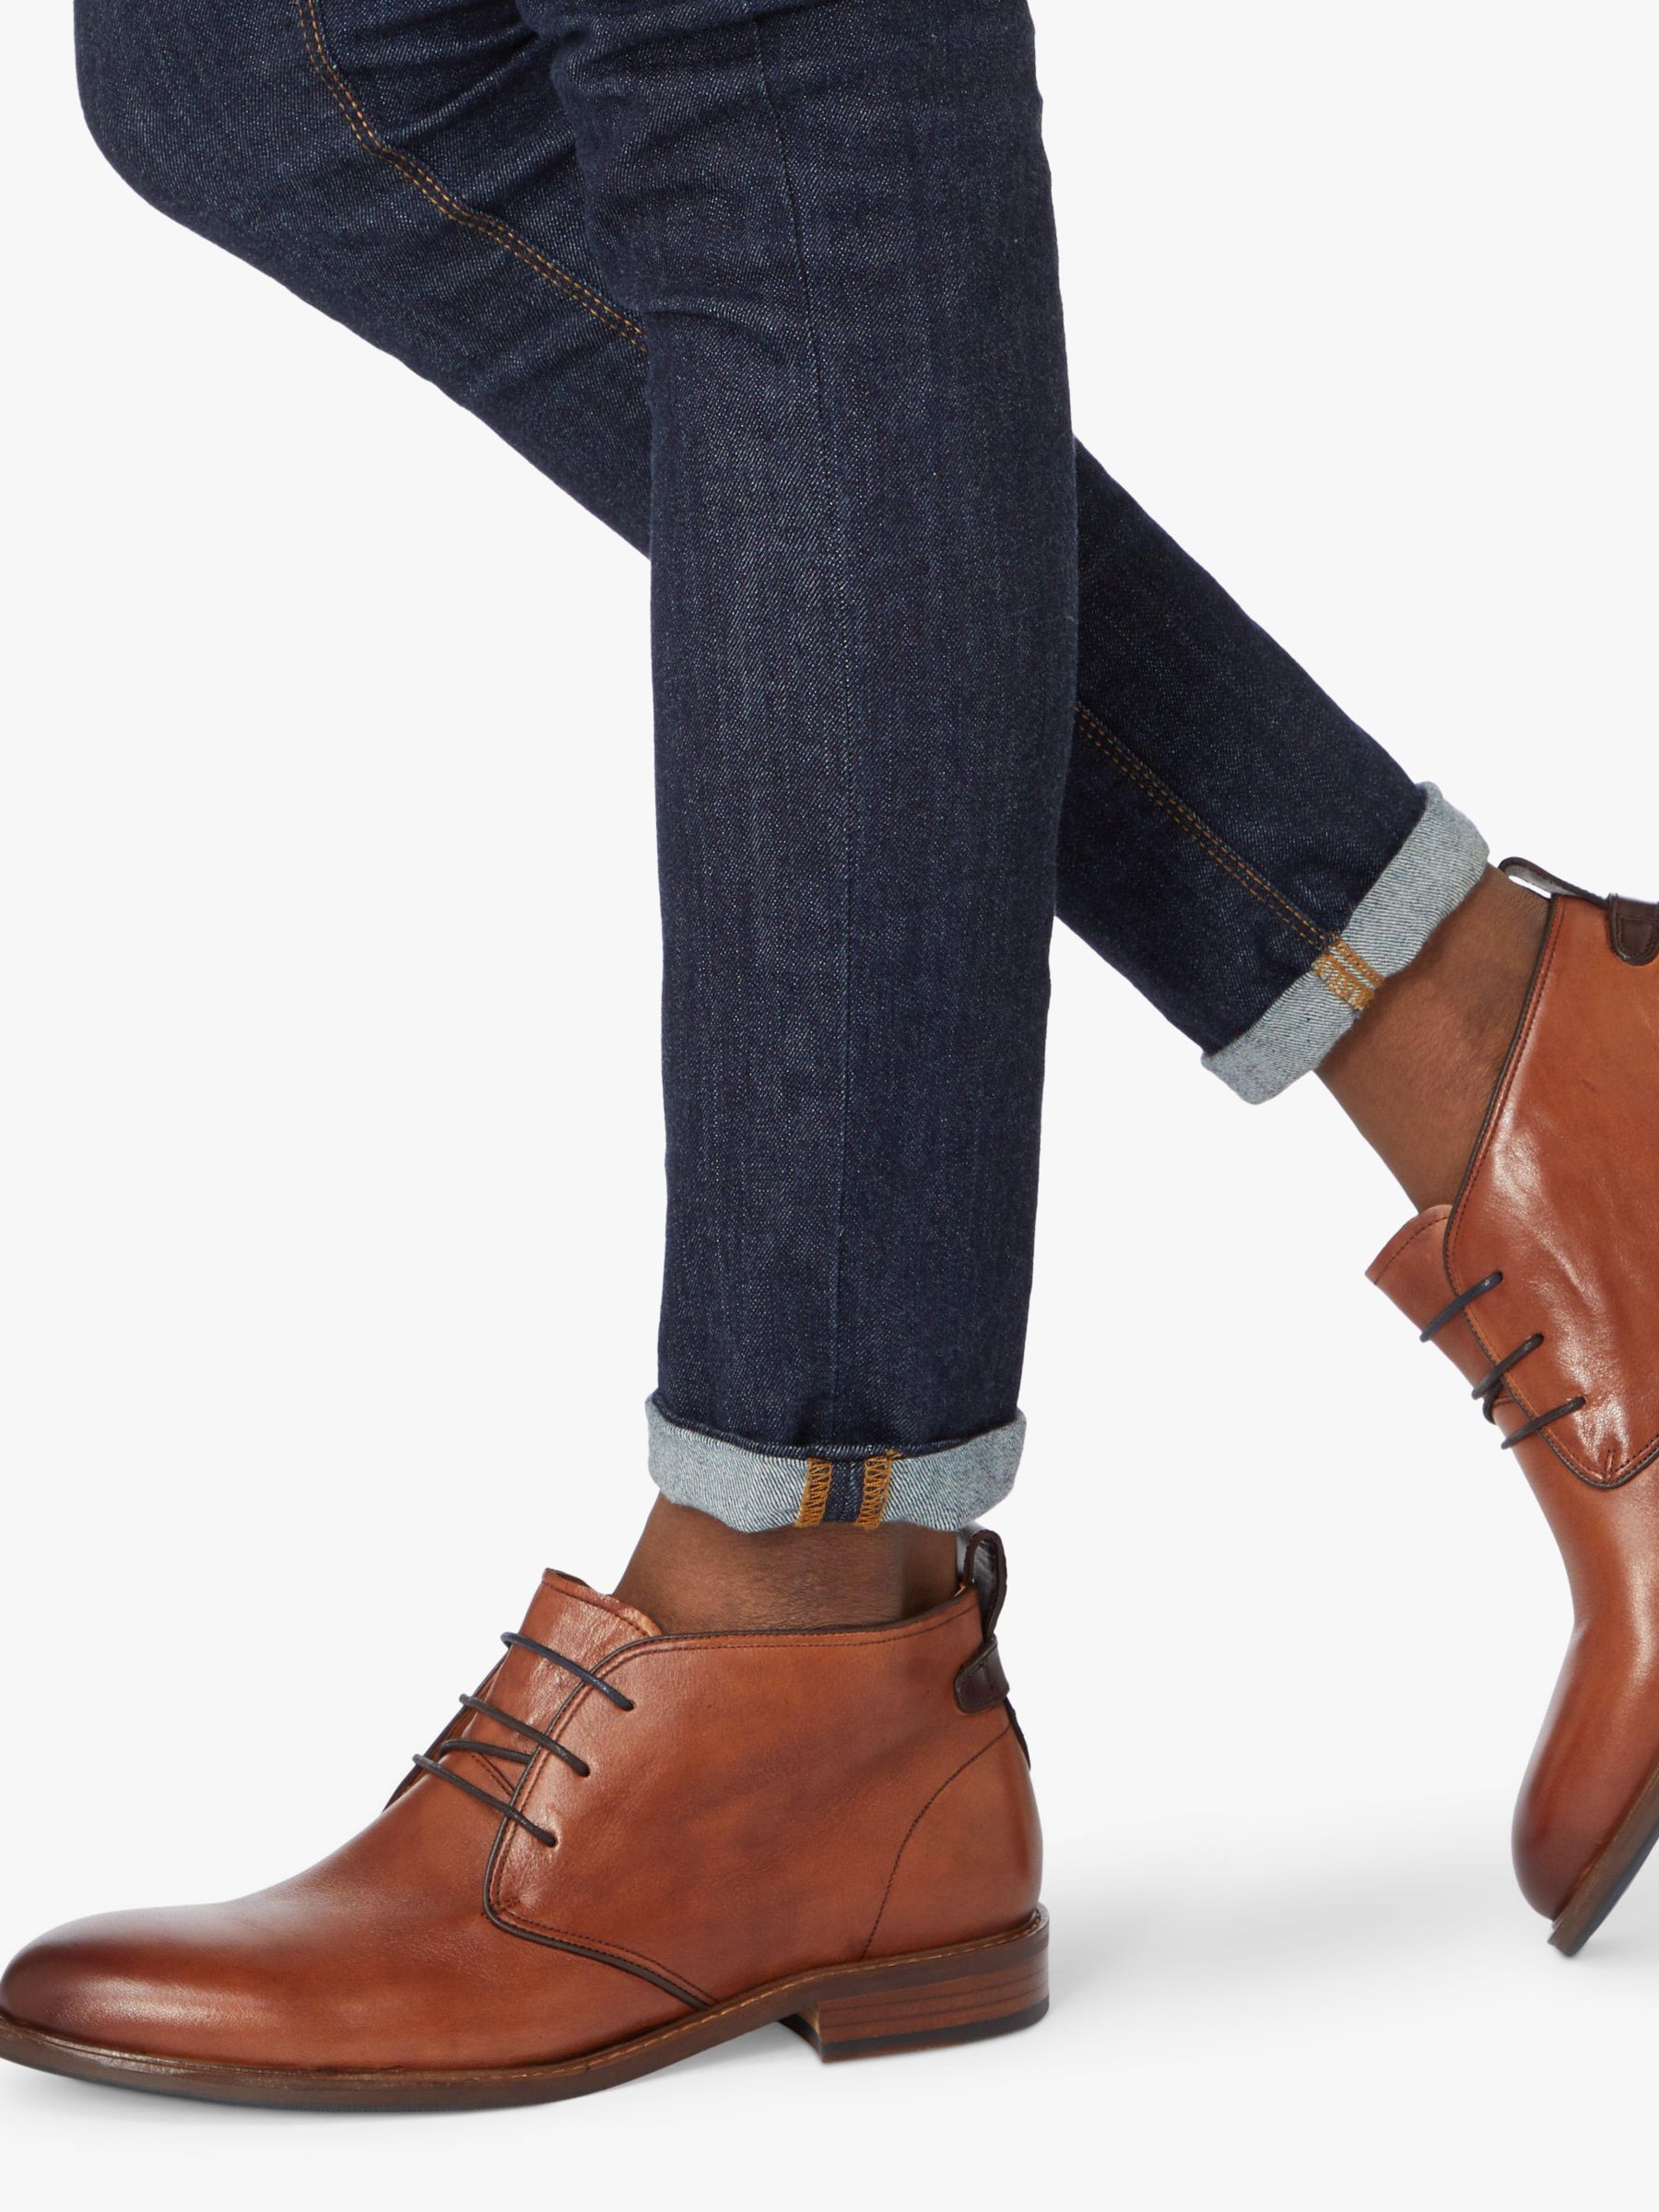 Dune Marching Leather Desert Boots, Tan at John Lewis & Partners